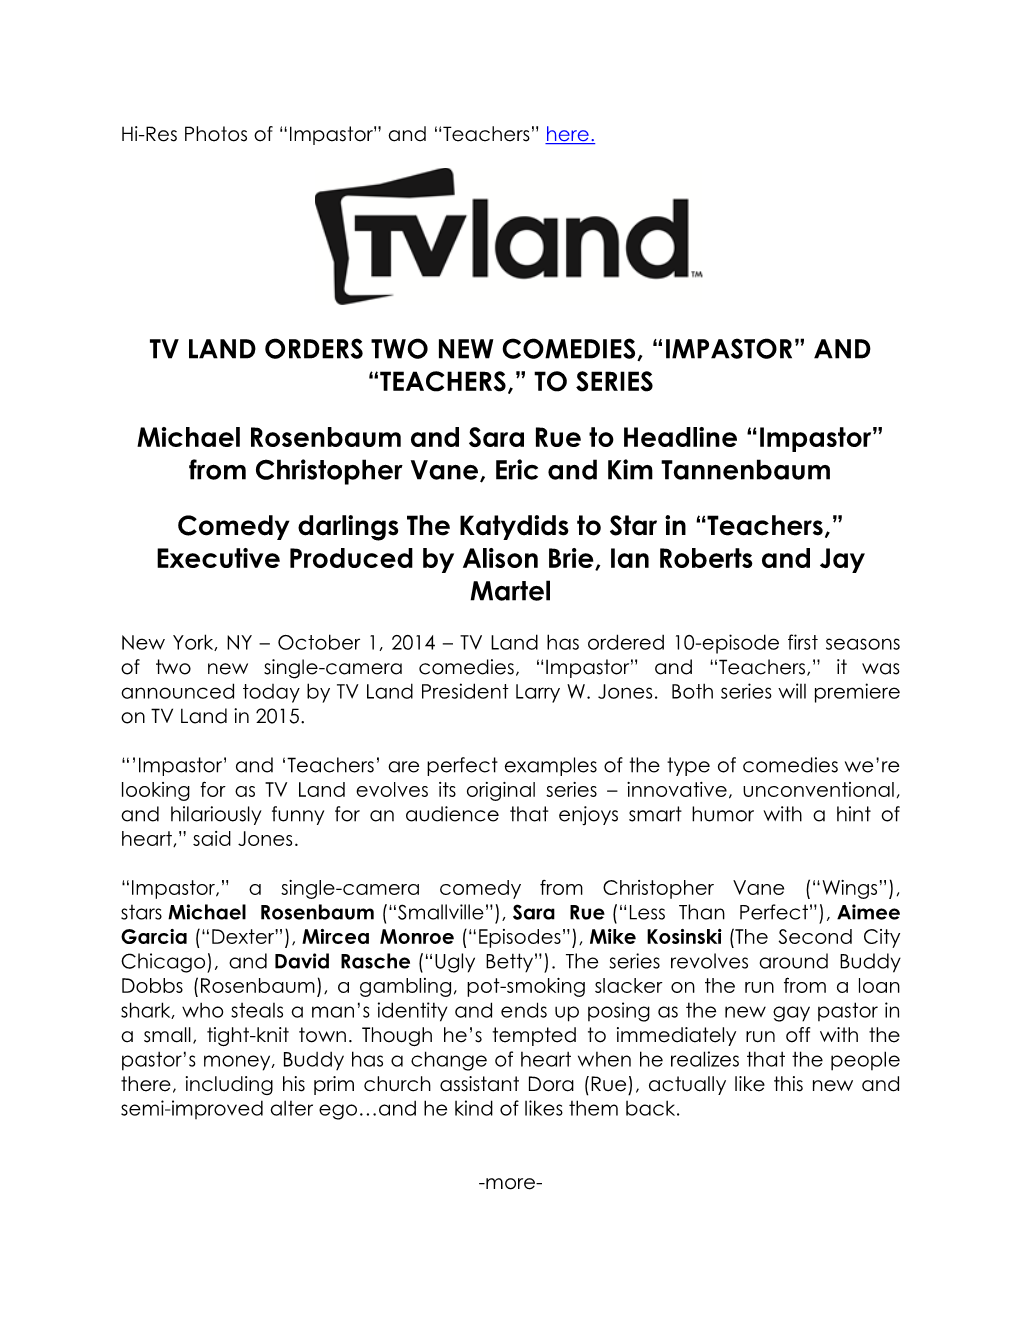 Tv Land Orders Two New Comedies, “Impastor” and “Teachers,” to Series